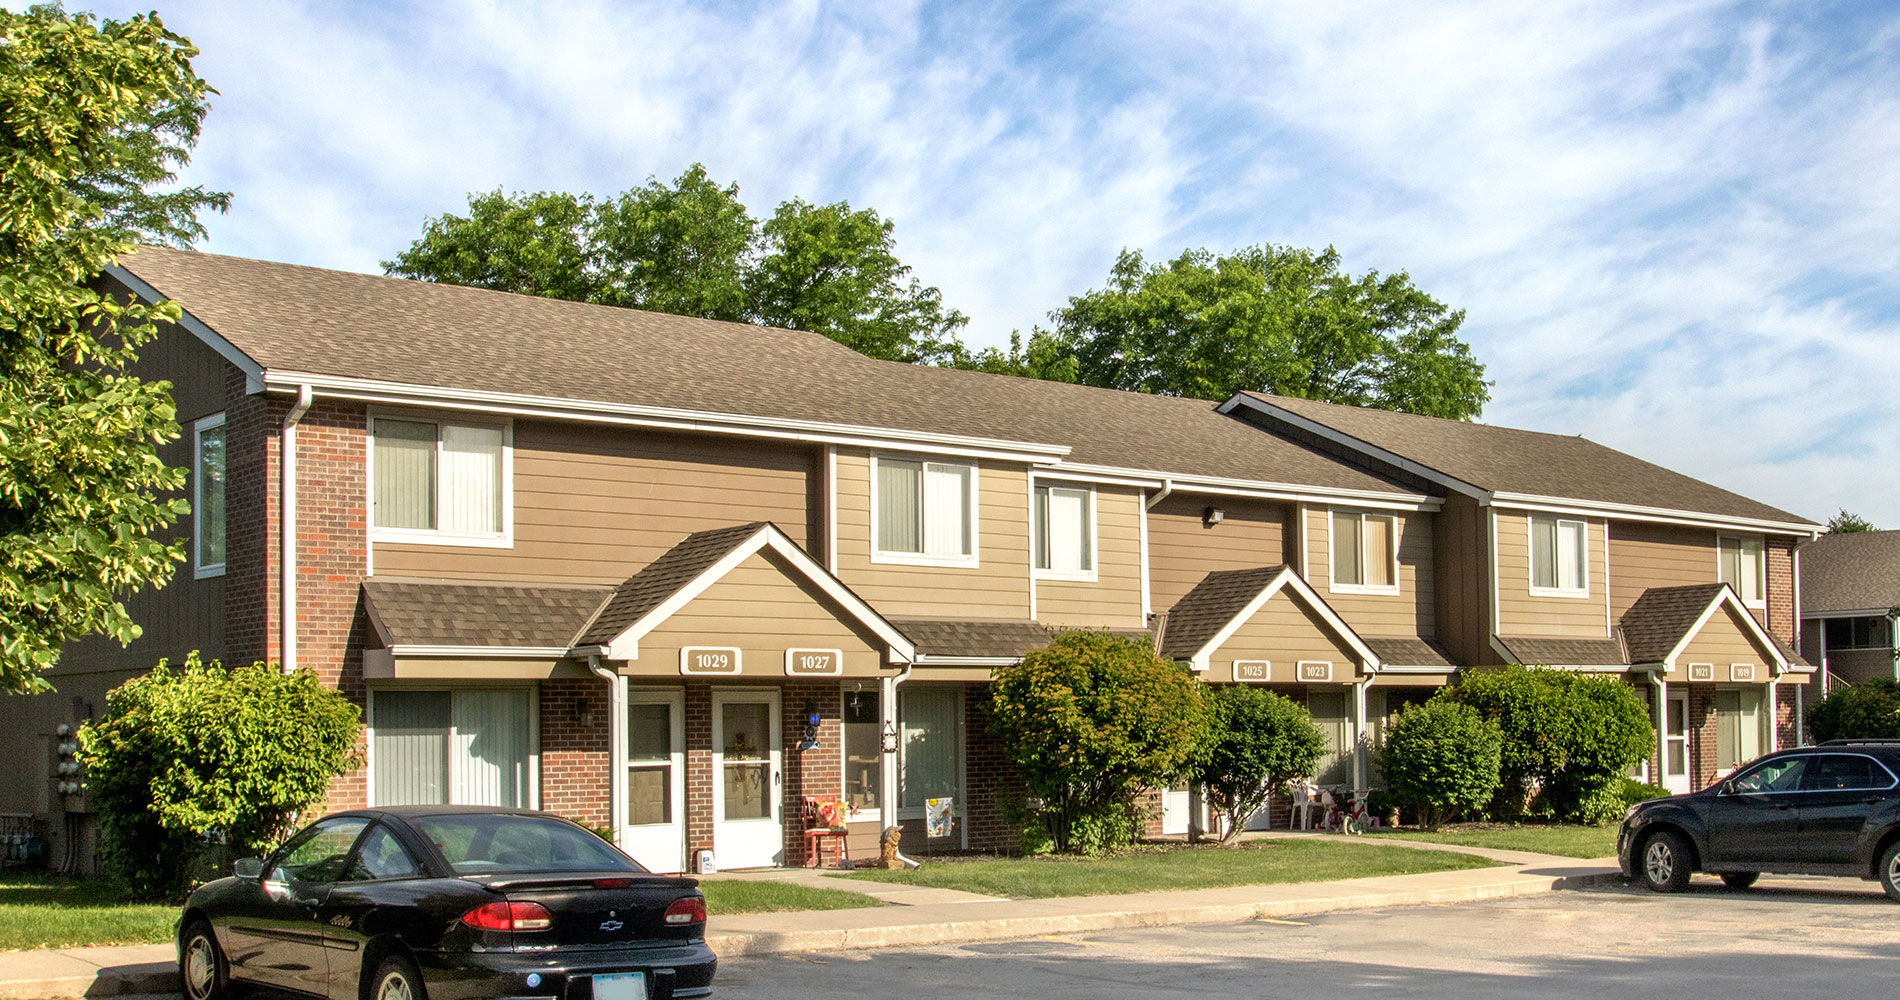 Property Exterior at Delaware Crossing Apartments & Townhomes